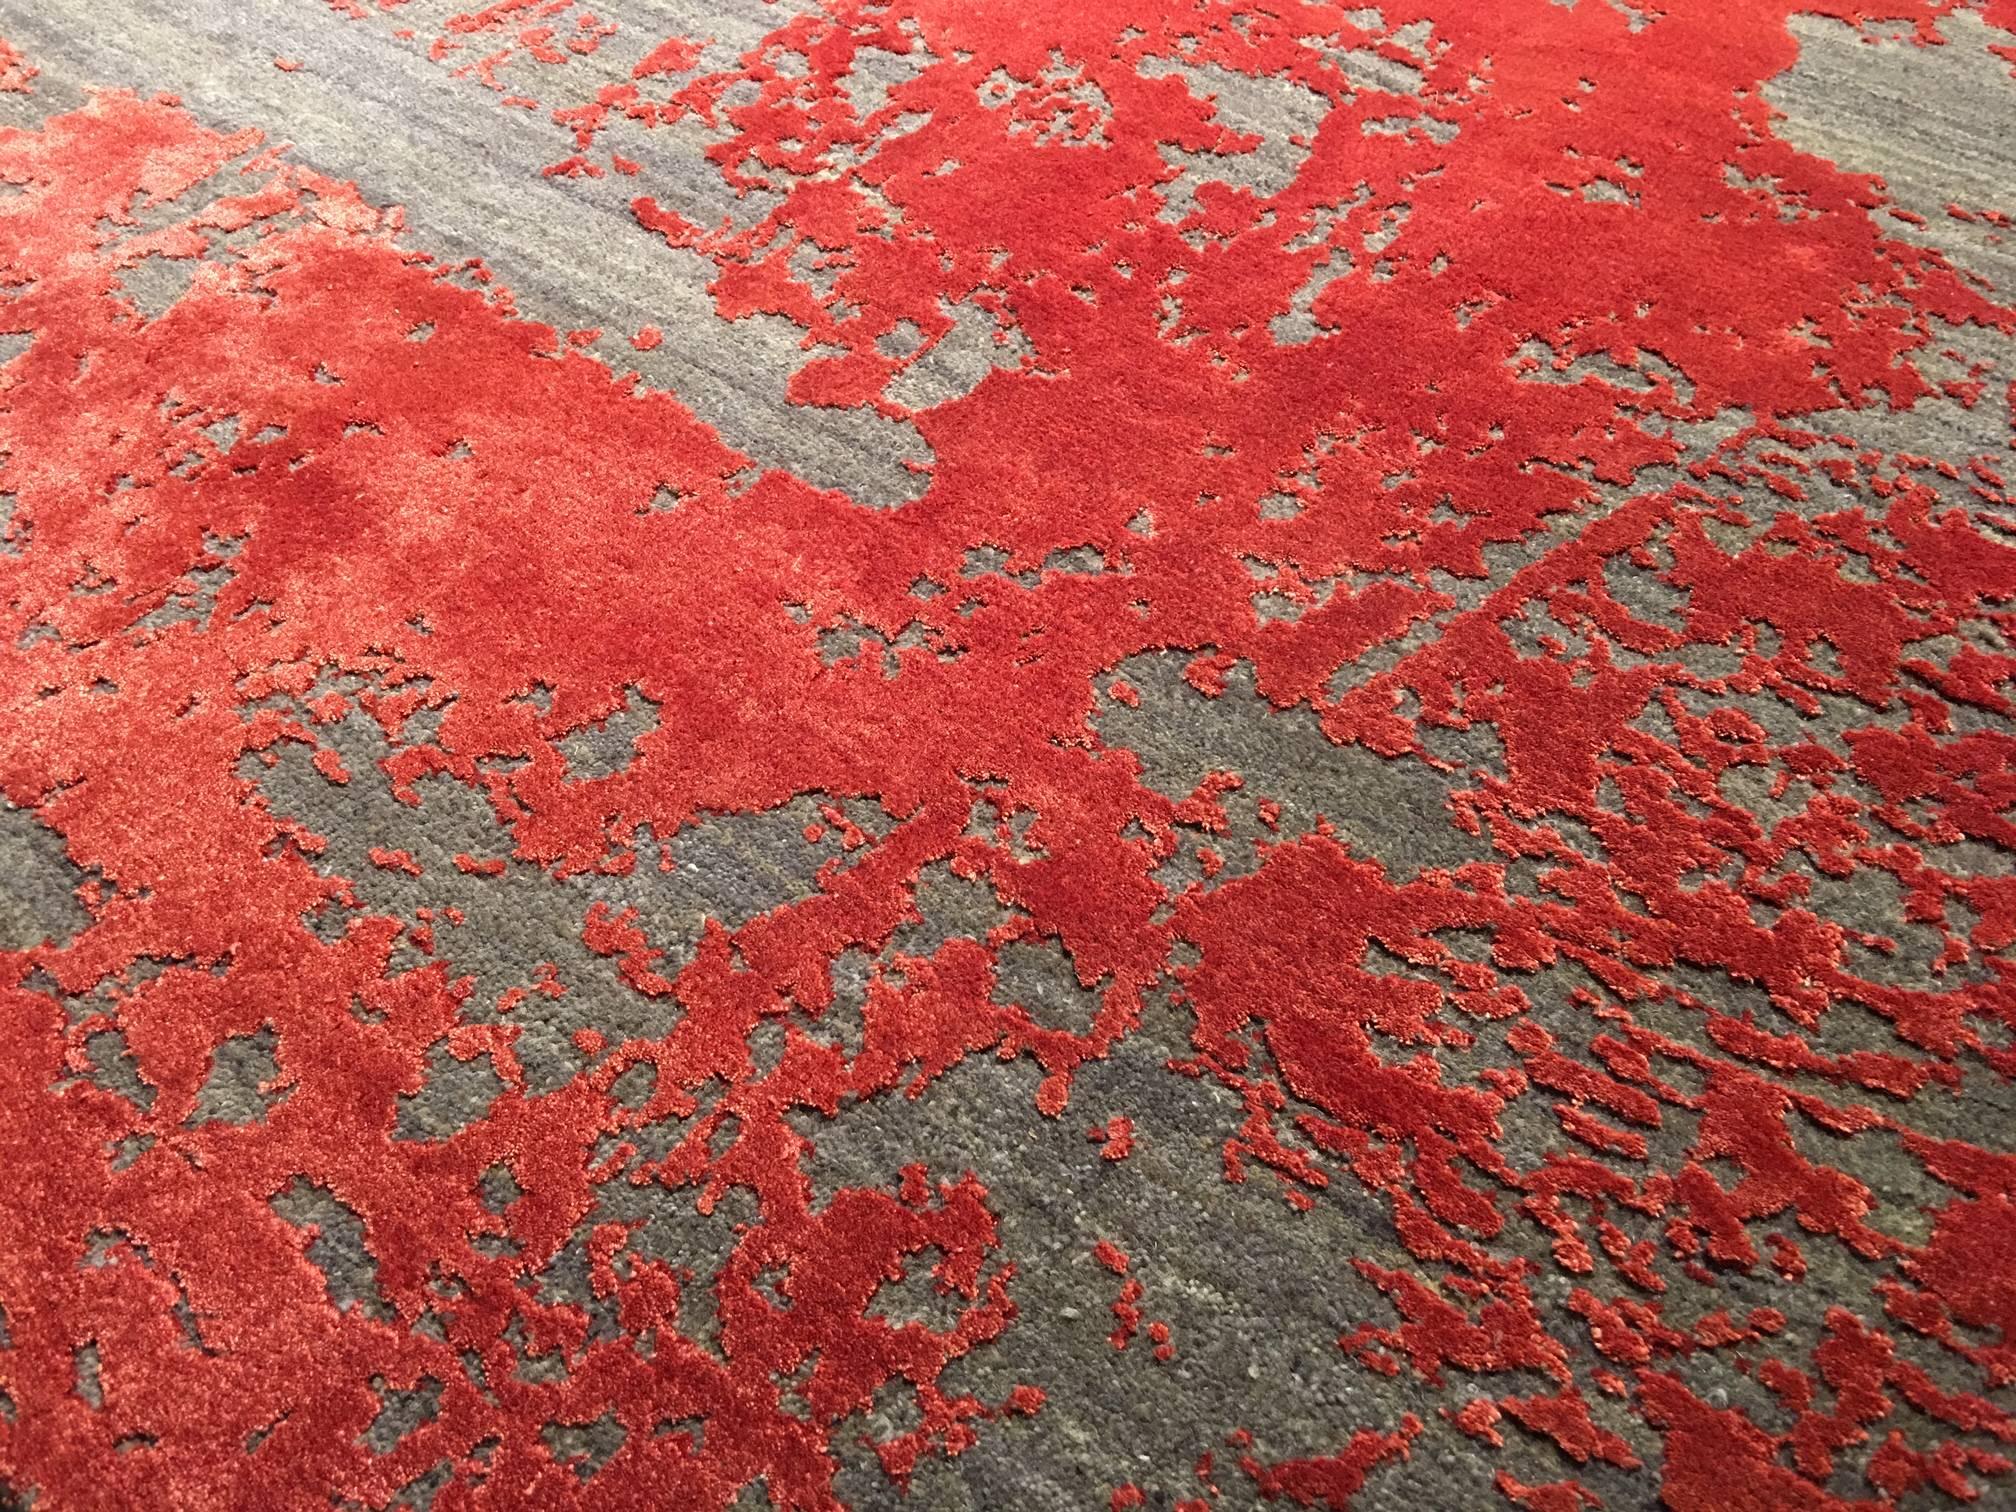 This beautiful hand-knotted design rug is like a modern painting for your floor. This collection is made of a lower pile cut grey wool and a higher pile viscose design in red. We can deliver this rug in different colors and sizes as our customers